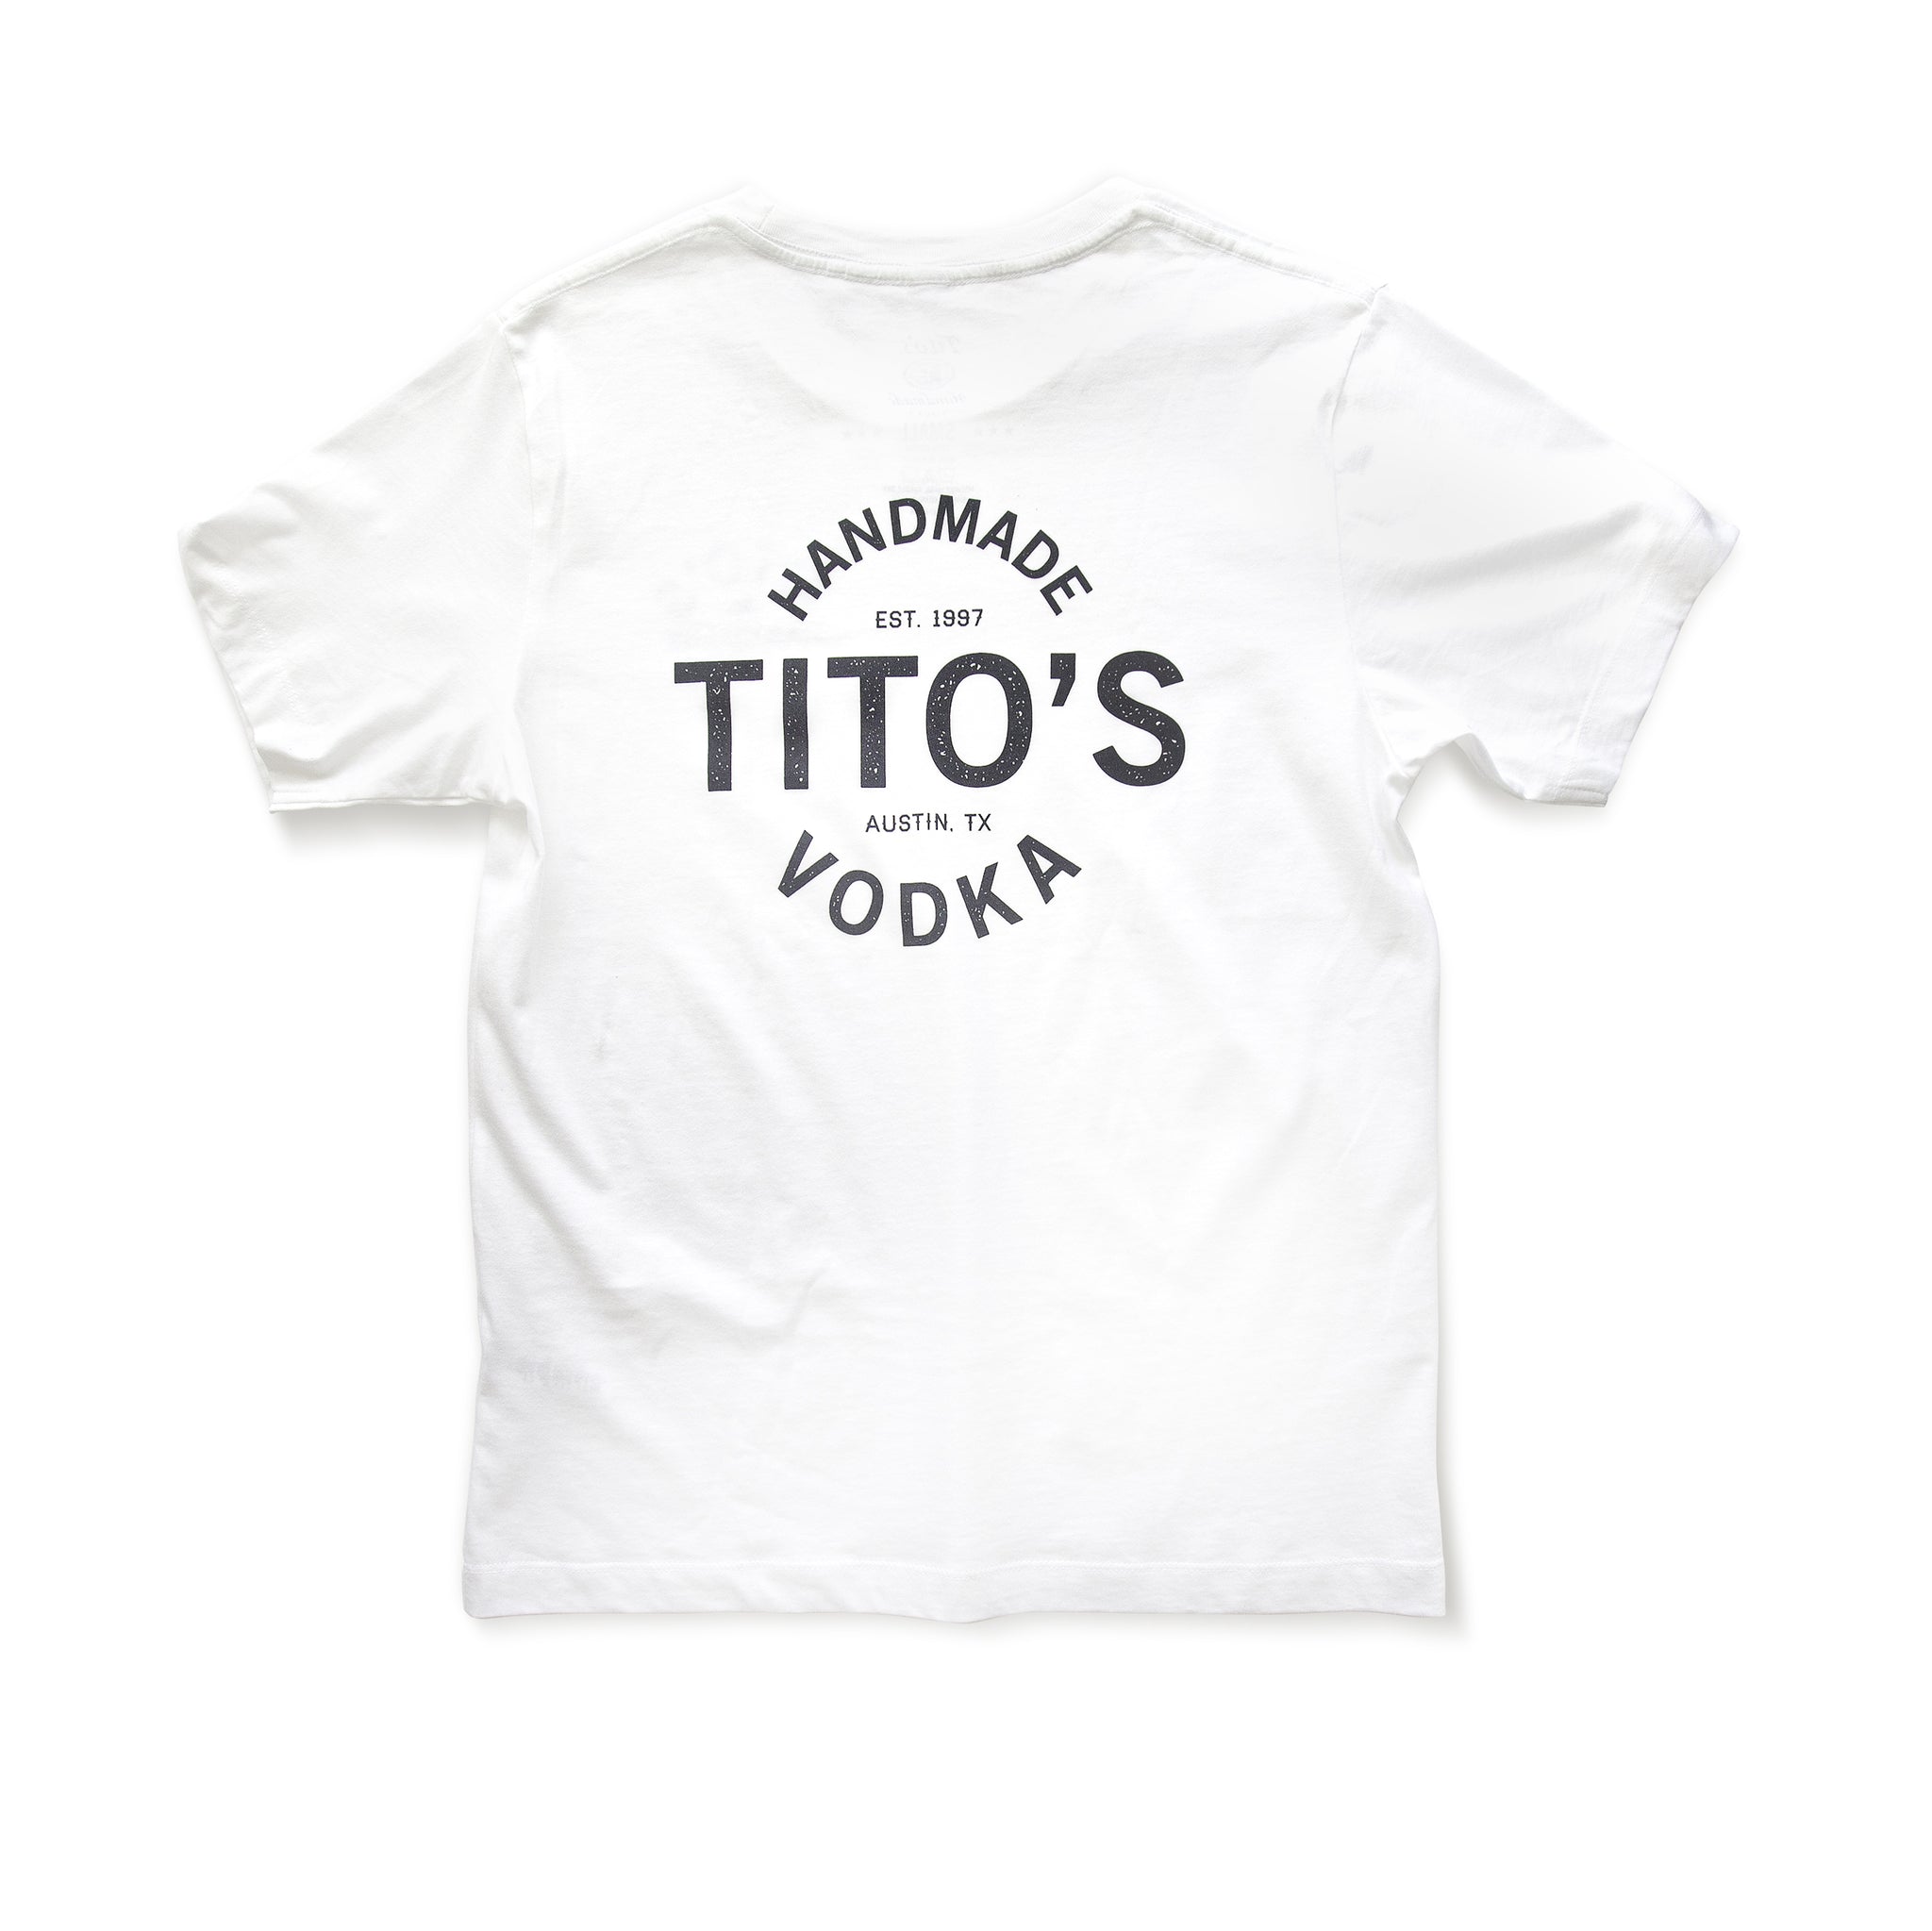 Back of white short-sleeved t-shirt with large design of Tito's Handmade Vodka, est. 1997, and Austin, TX